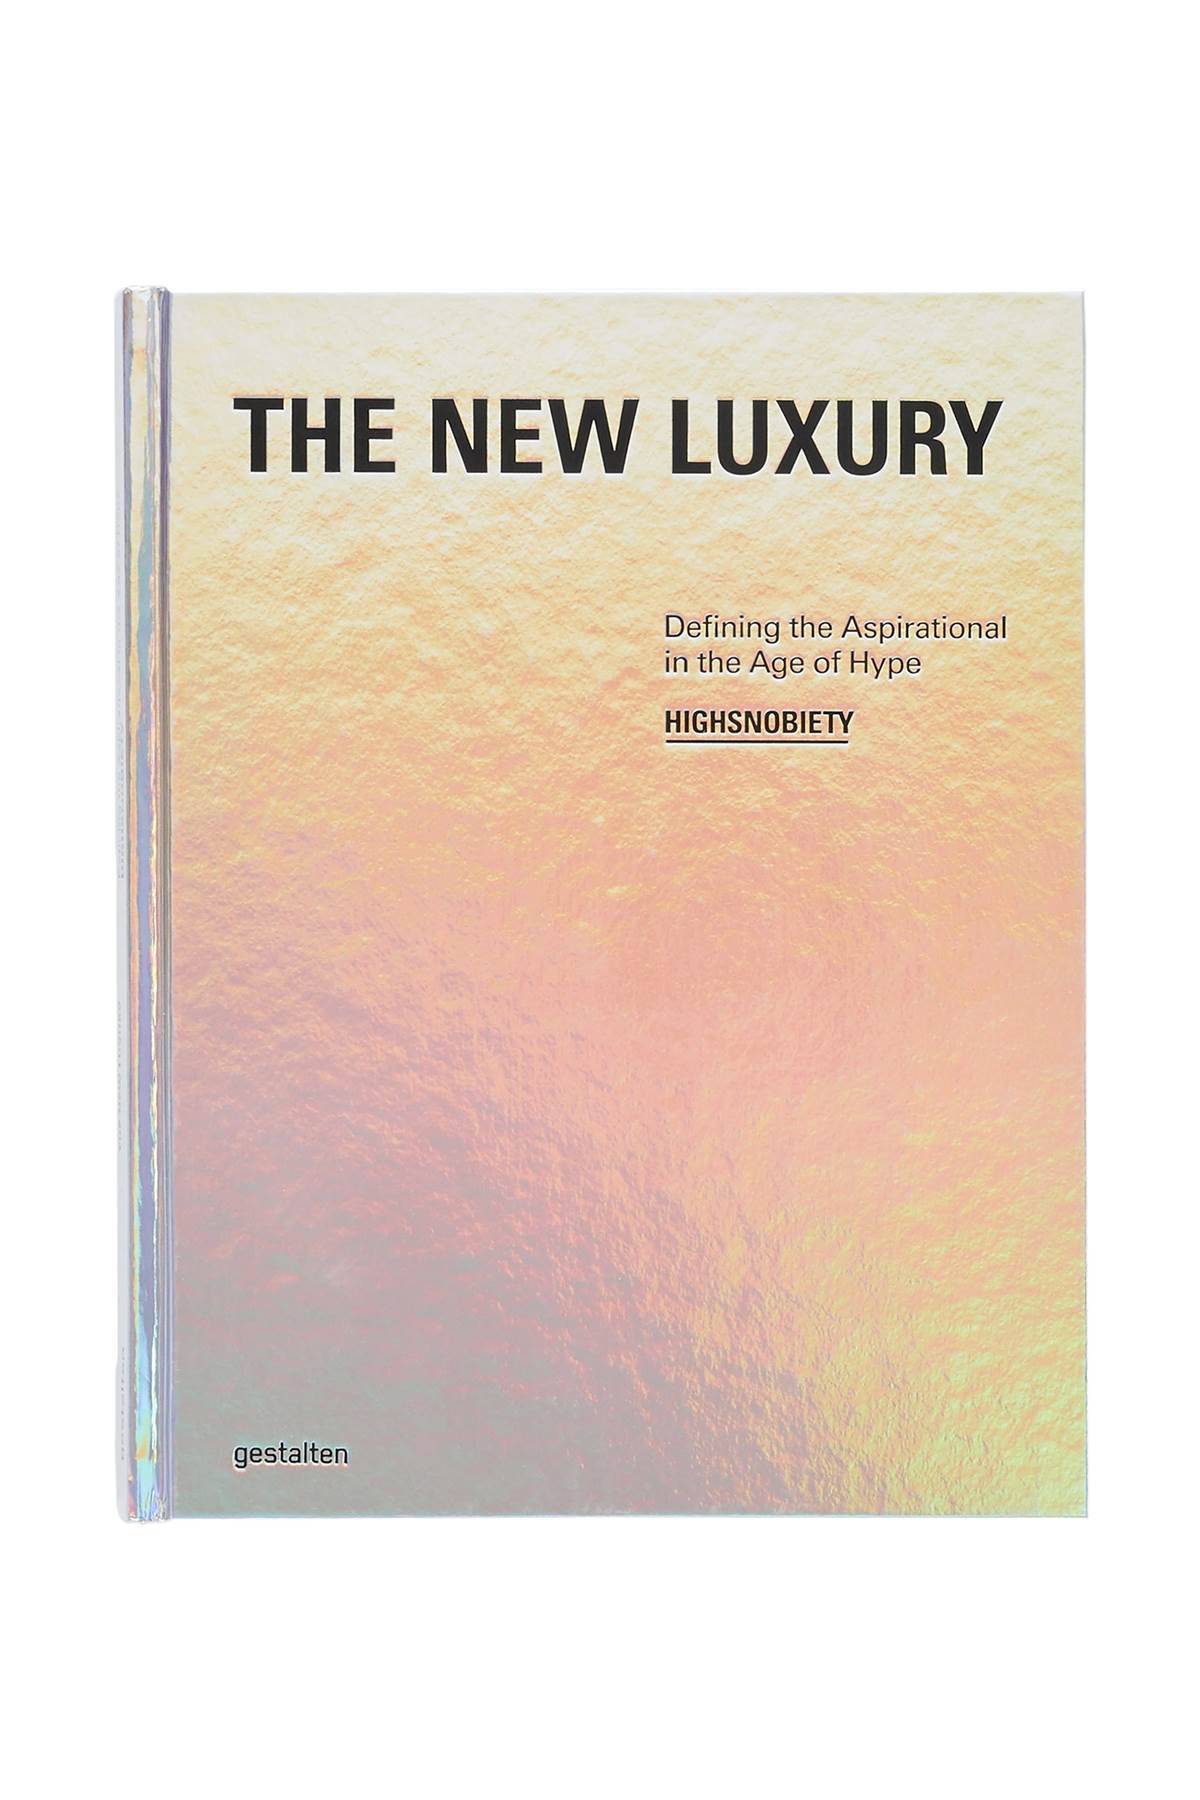 NEW MAGS NEW MAGS the new luxury - highsnobiety: defining the aspirational in the age of hype